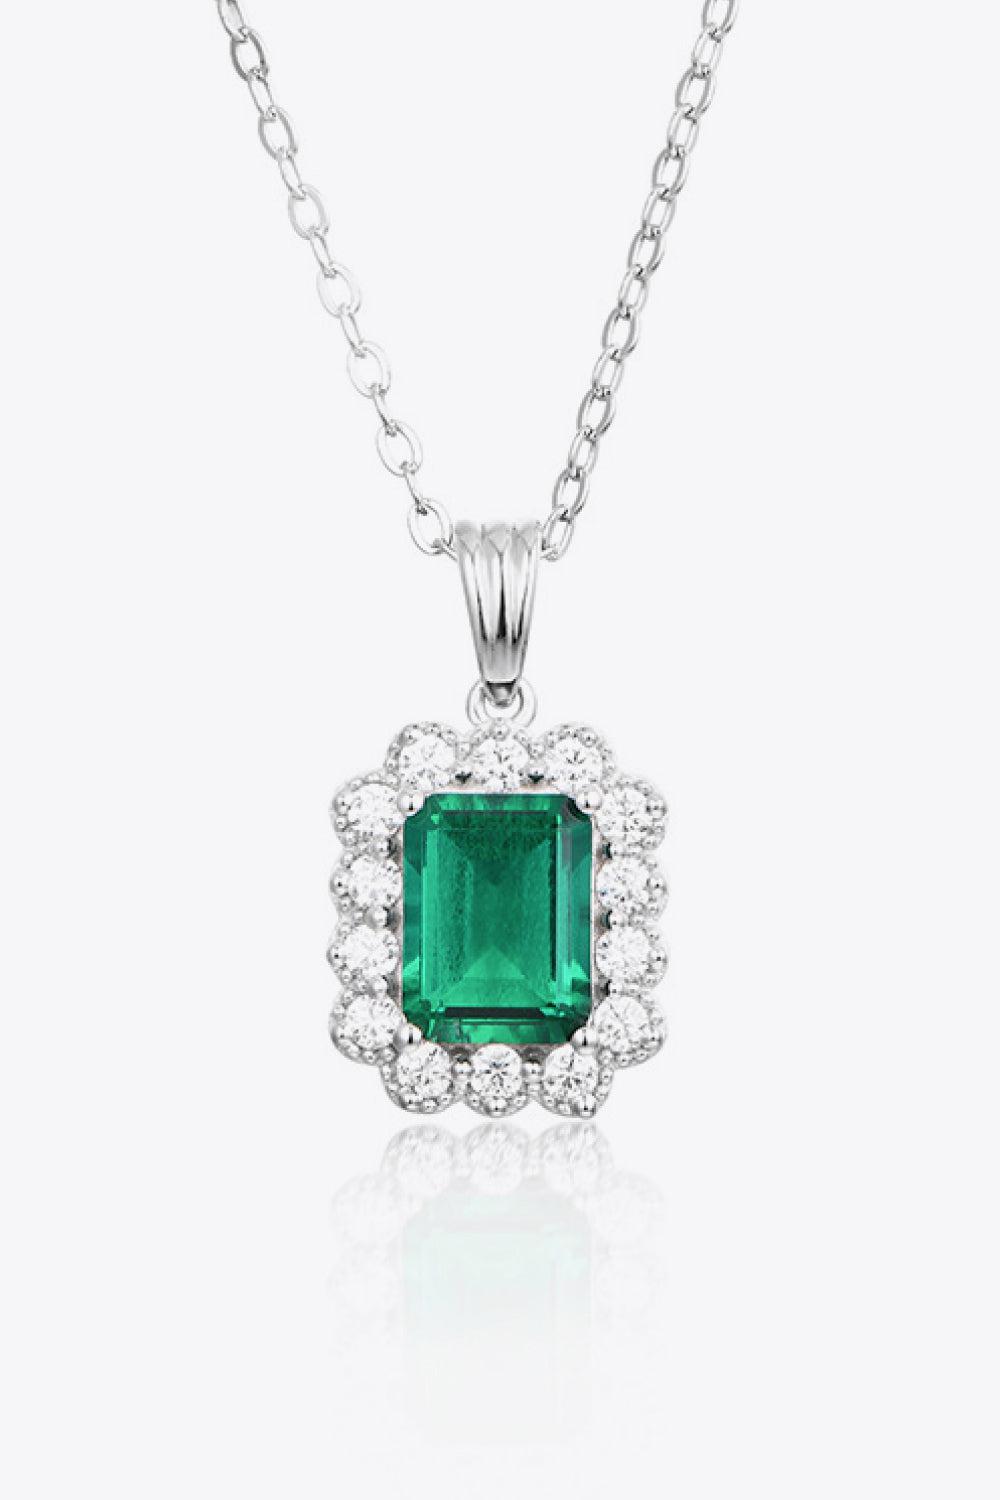 1.5 Carat Lab-Grown Emerald Pendant 925 Sterling Silver Necklace BLUE ZONE PLANET